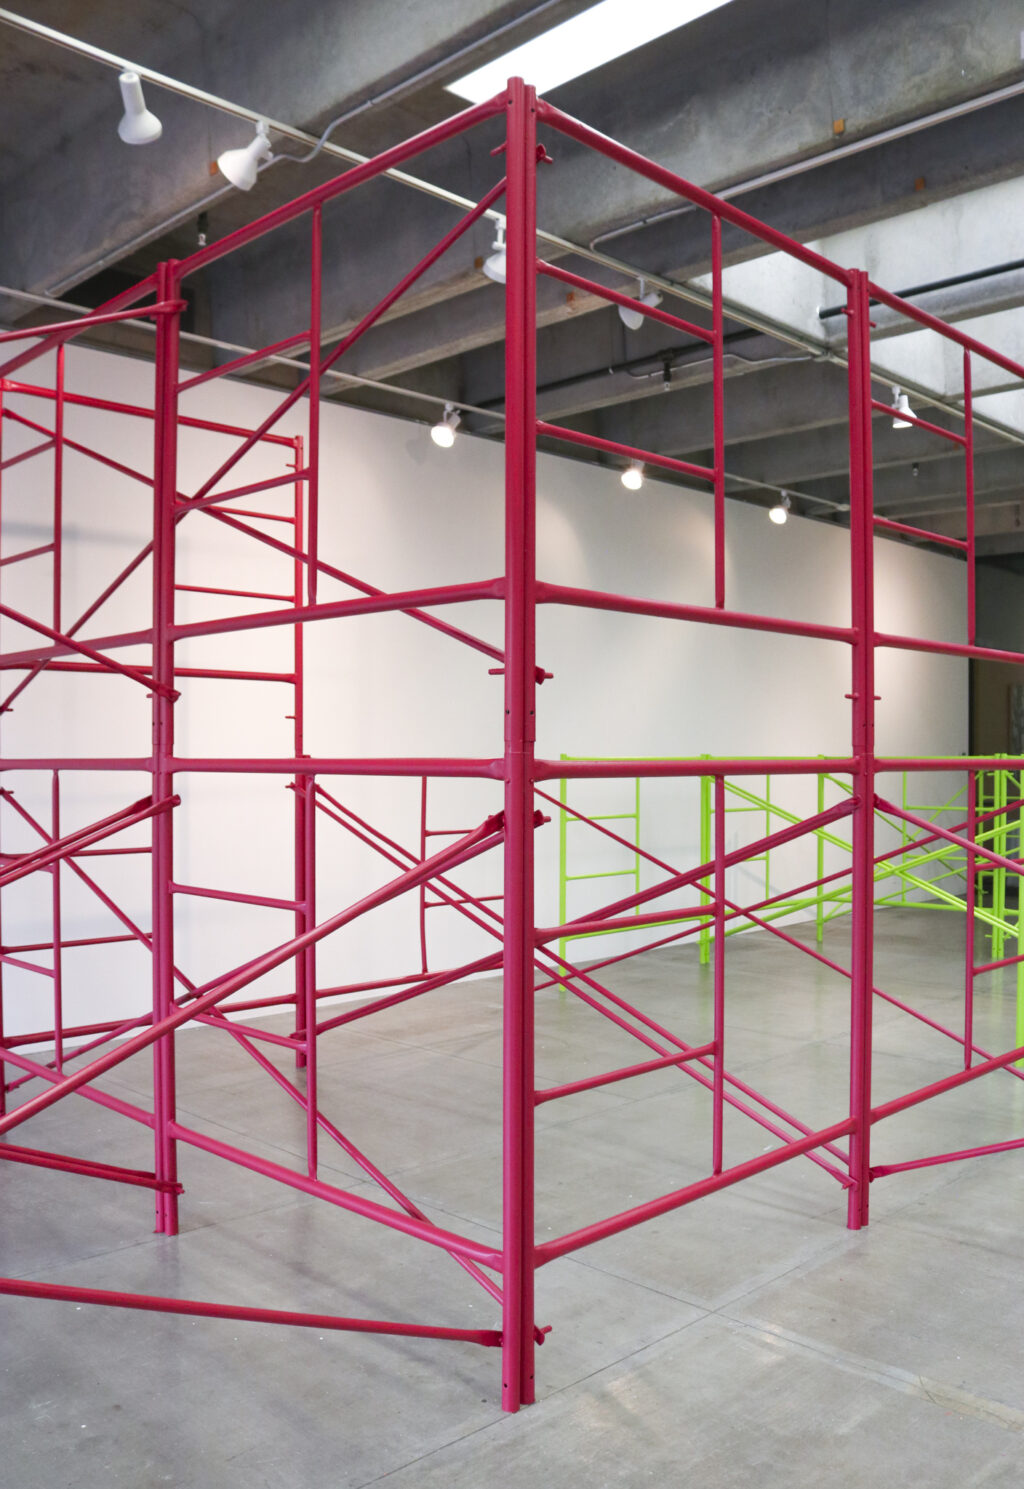 Professor Avantika Bawa explores color and modularity in ‘Charged Voids’ installation